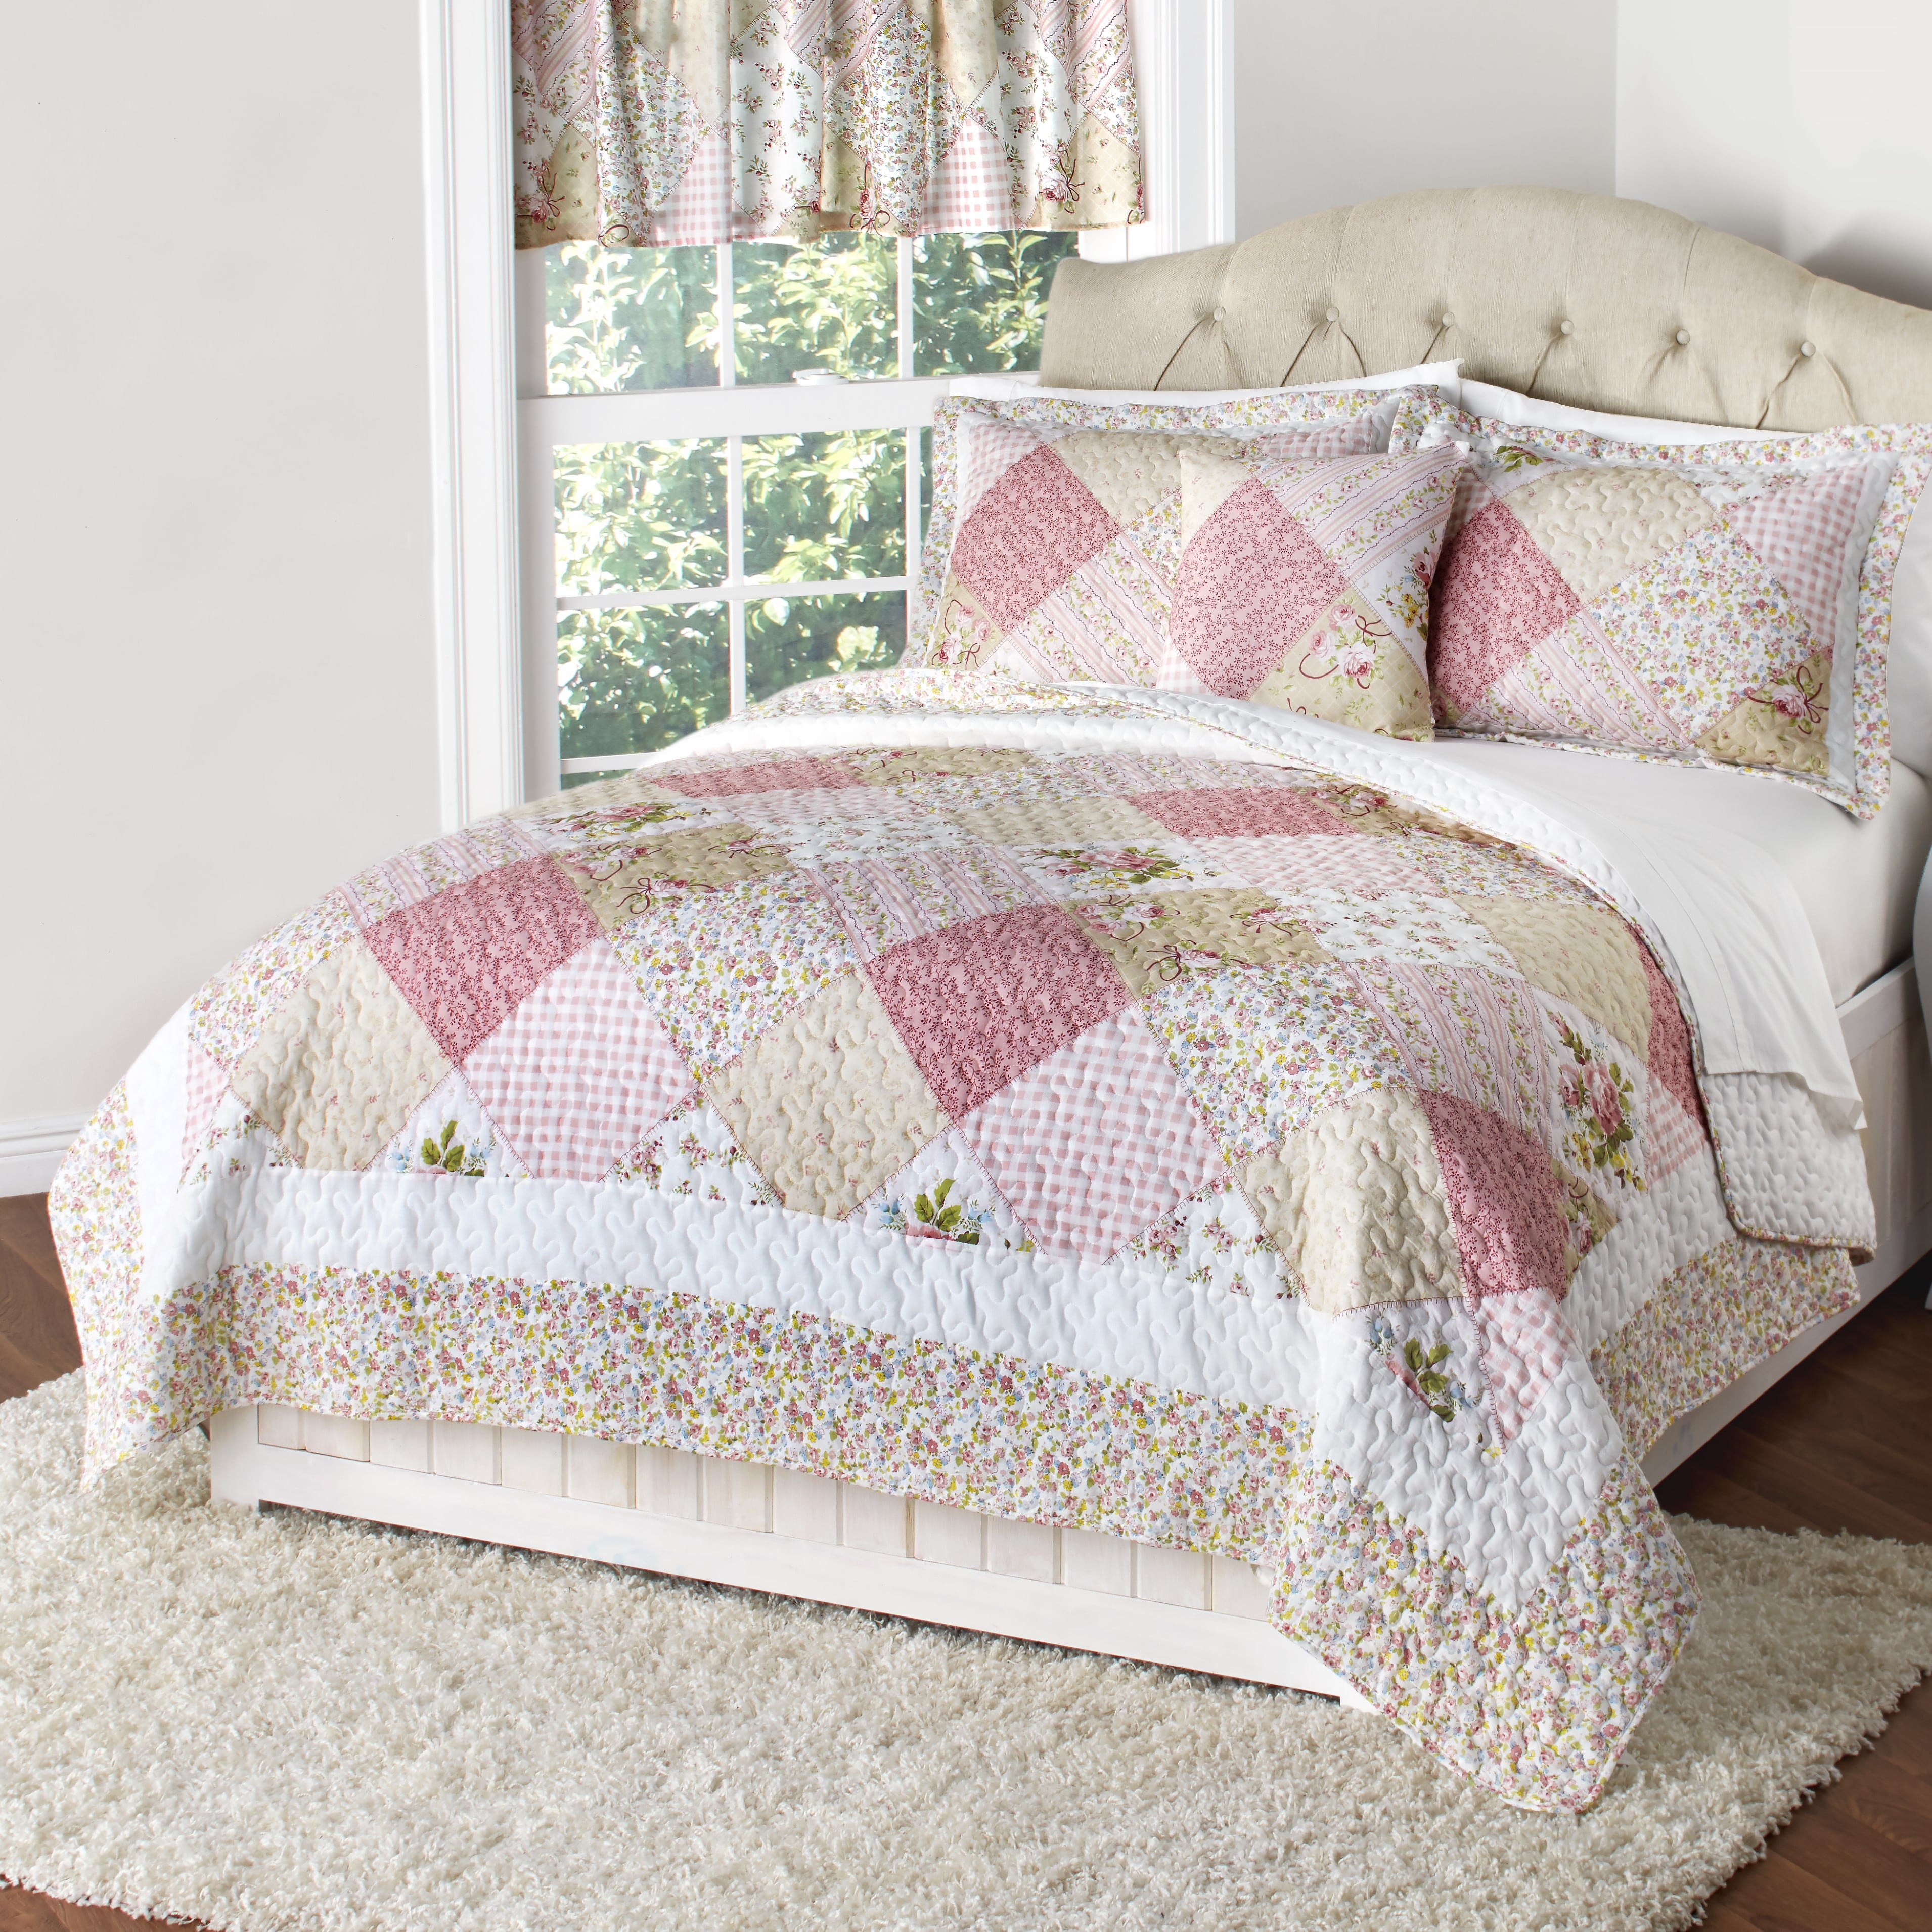 Emma Details about   3Pcs Embroidery Quilts Bedspreads Set Bedding Coverlet Set Queen Oversized 